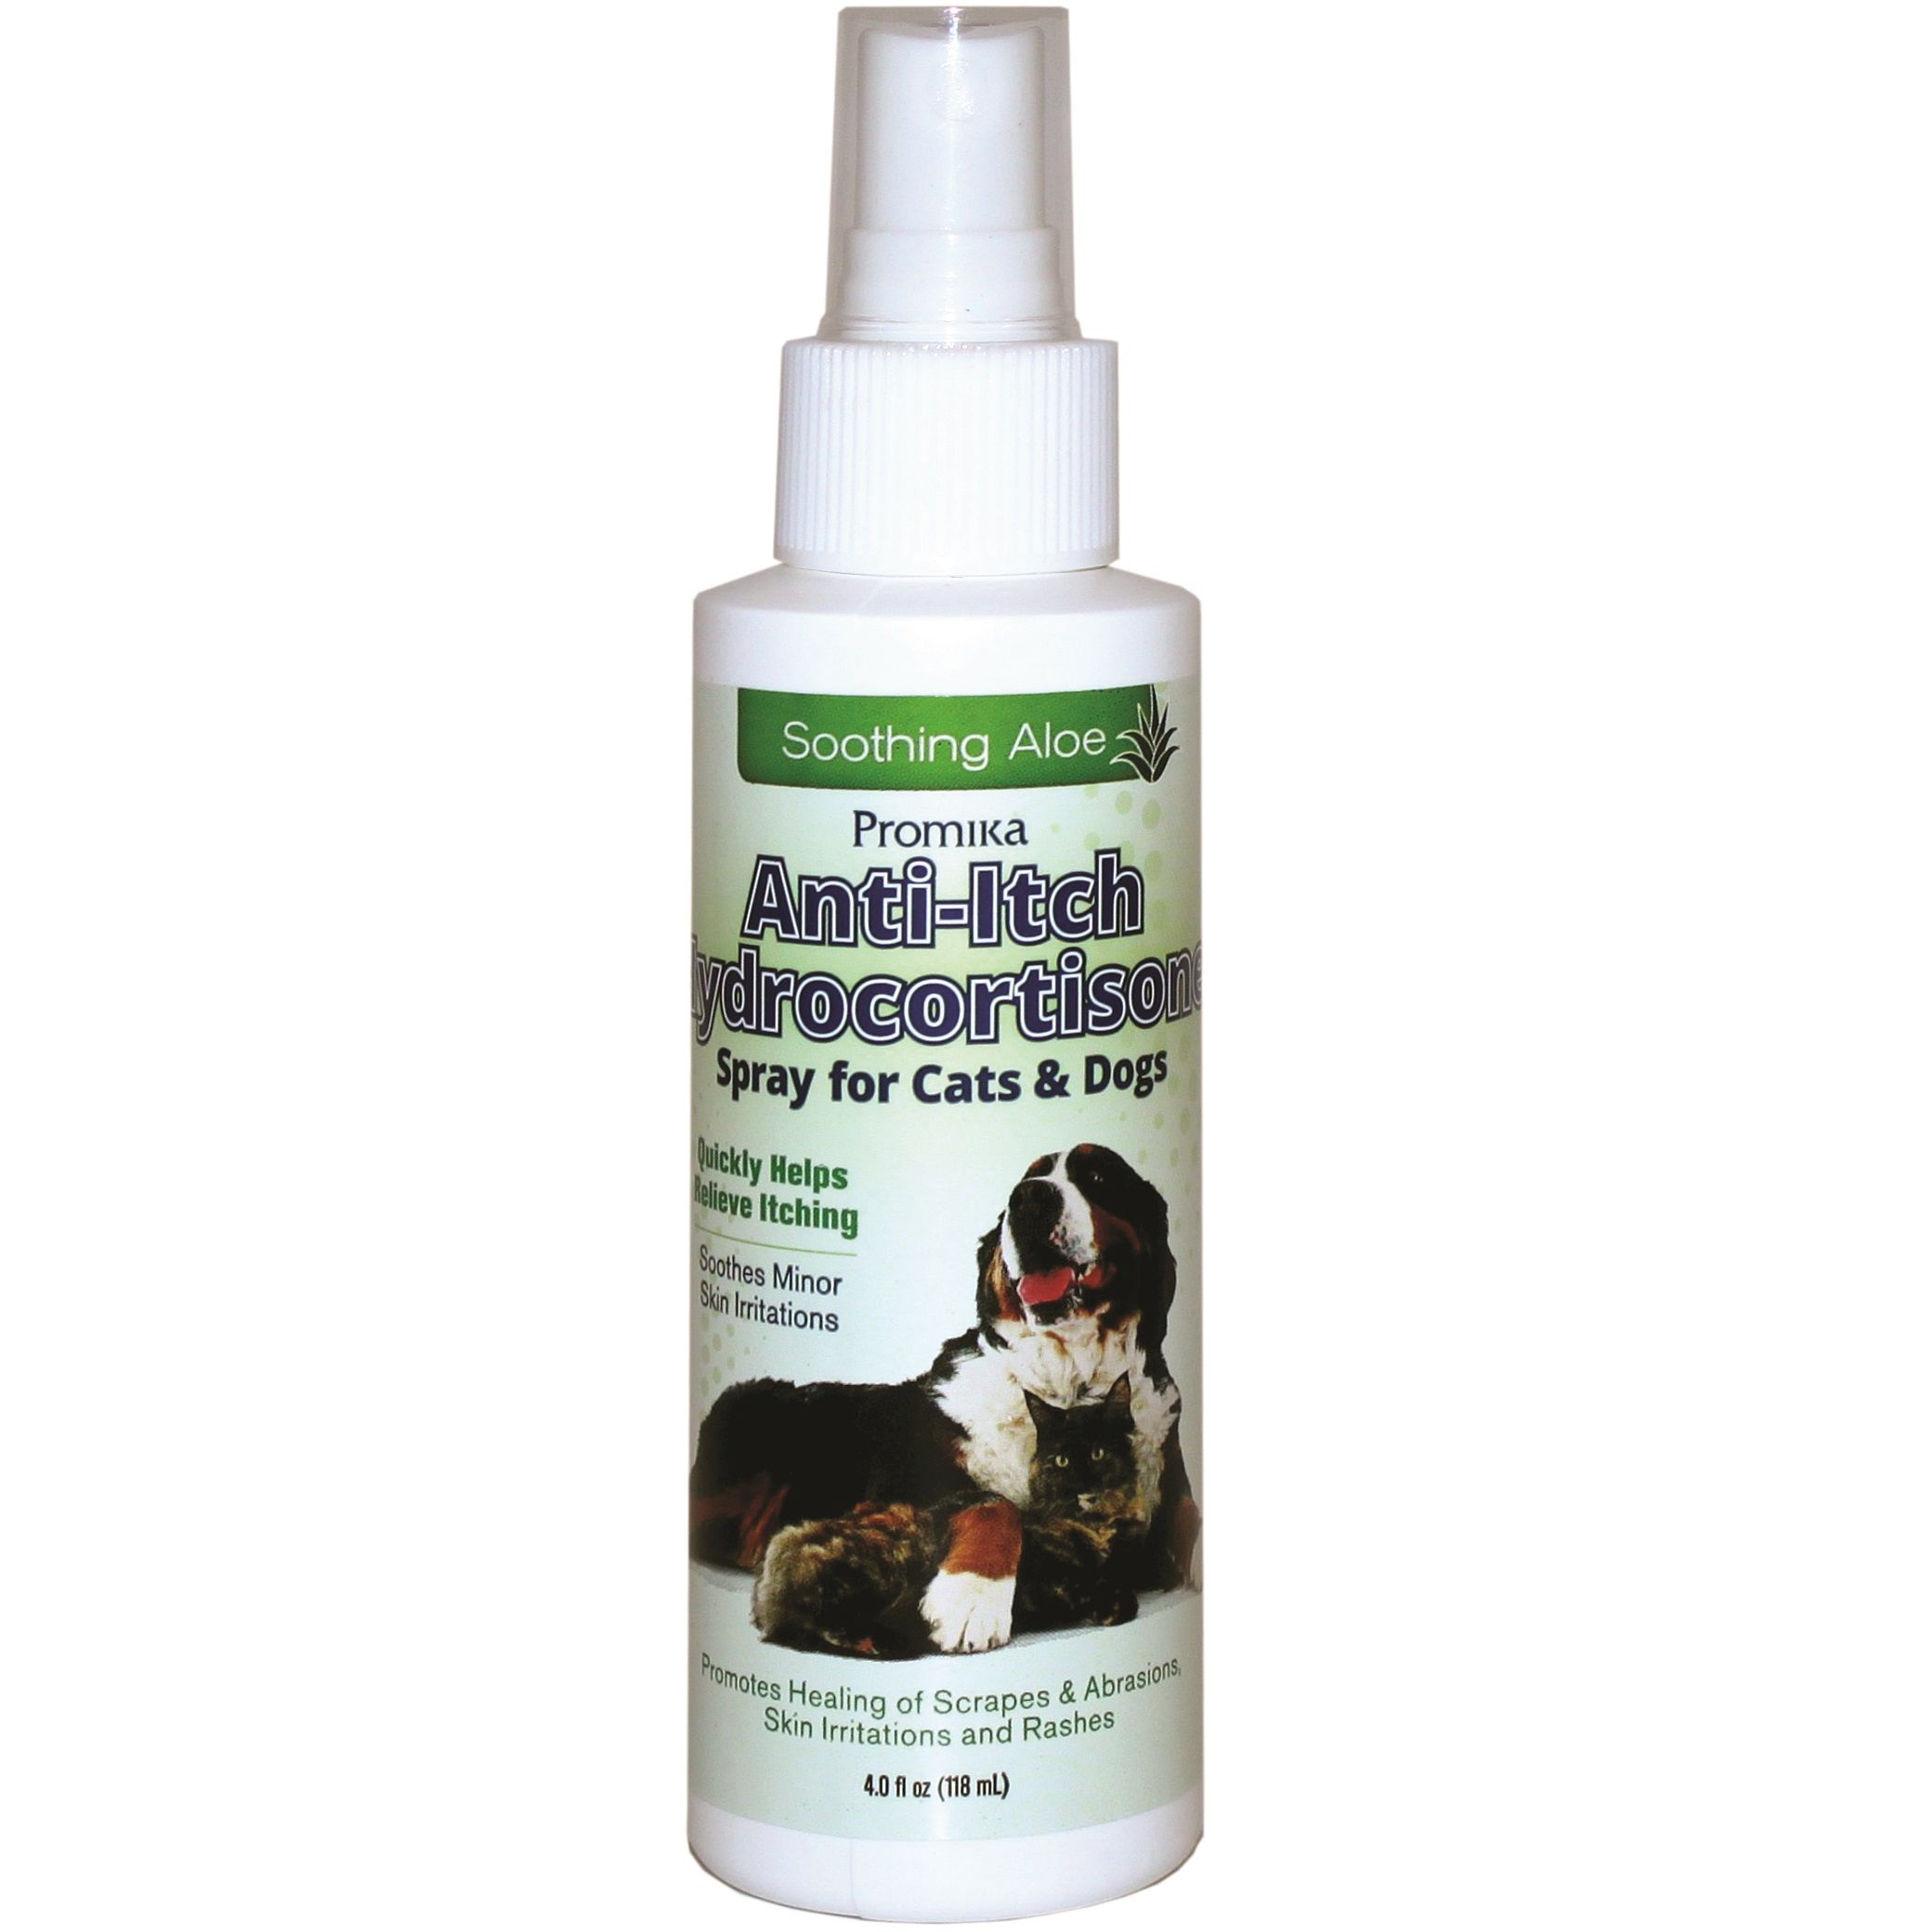 Promika AntiItch Hydrocortisone Spray for Cats & Dogs